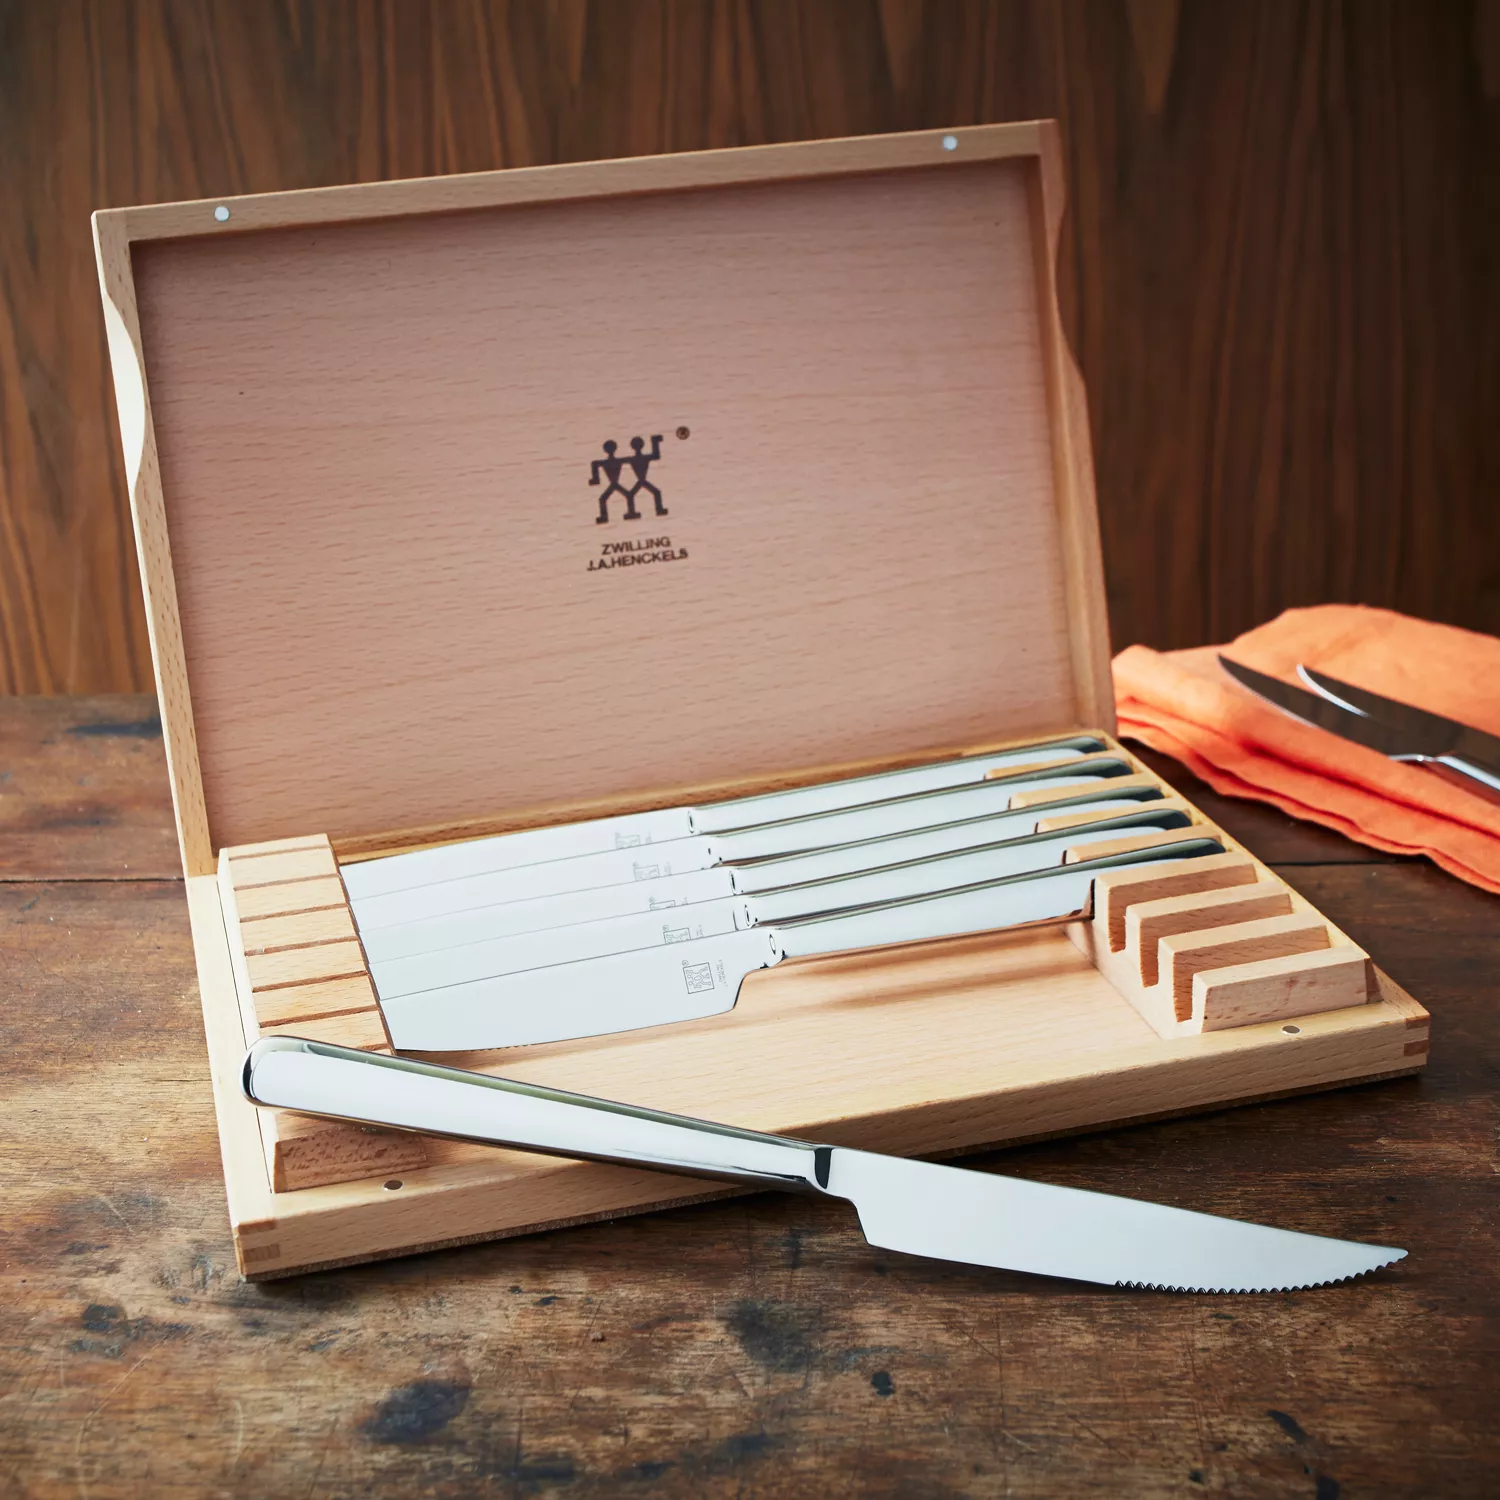 Zwilling J.A. Henckels Steak Knives with Box, Set of 8